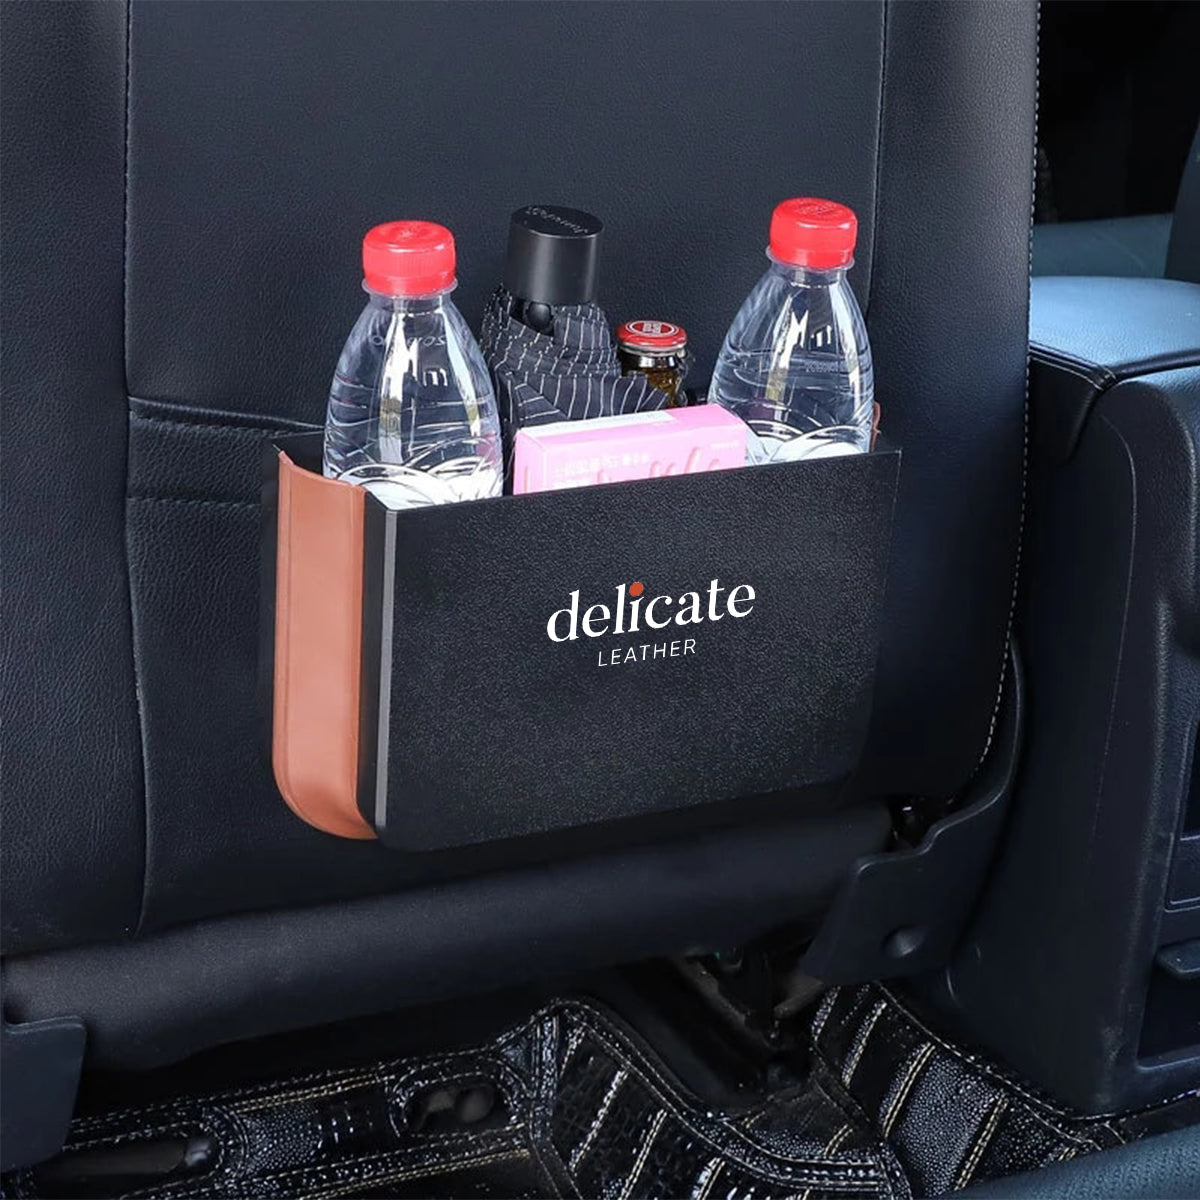 Delicate Leather Hanging Waterproof Car Trash can-Foldable, Custom For Your Cars, Waterproof, and Equipped with Cup Holders and Trays. Multi-Purpose, Car Accessories VE11992 - Delicate Leather